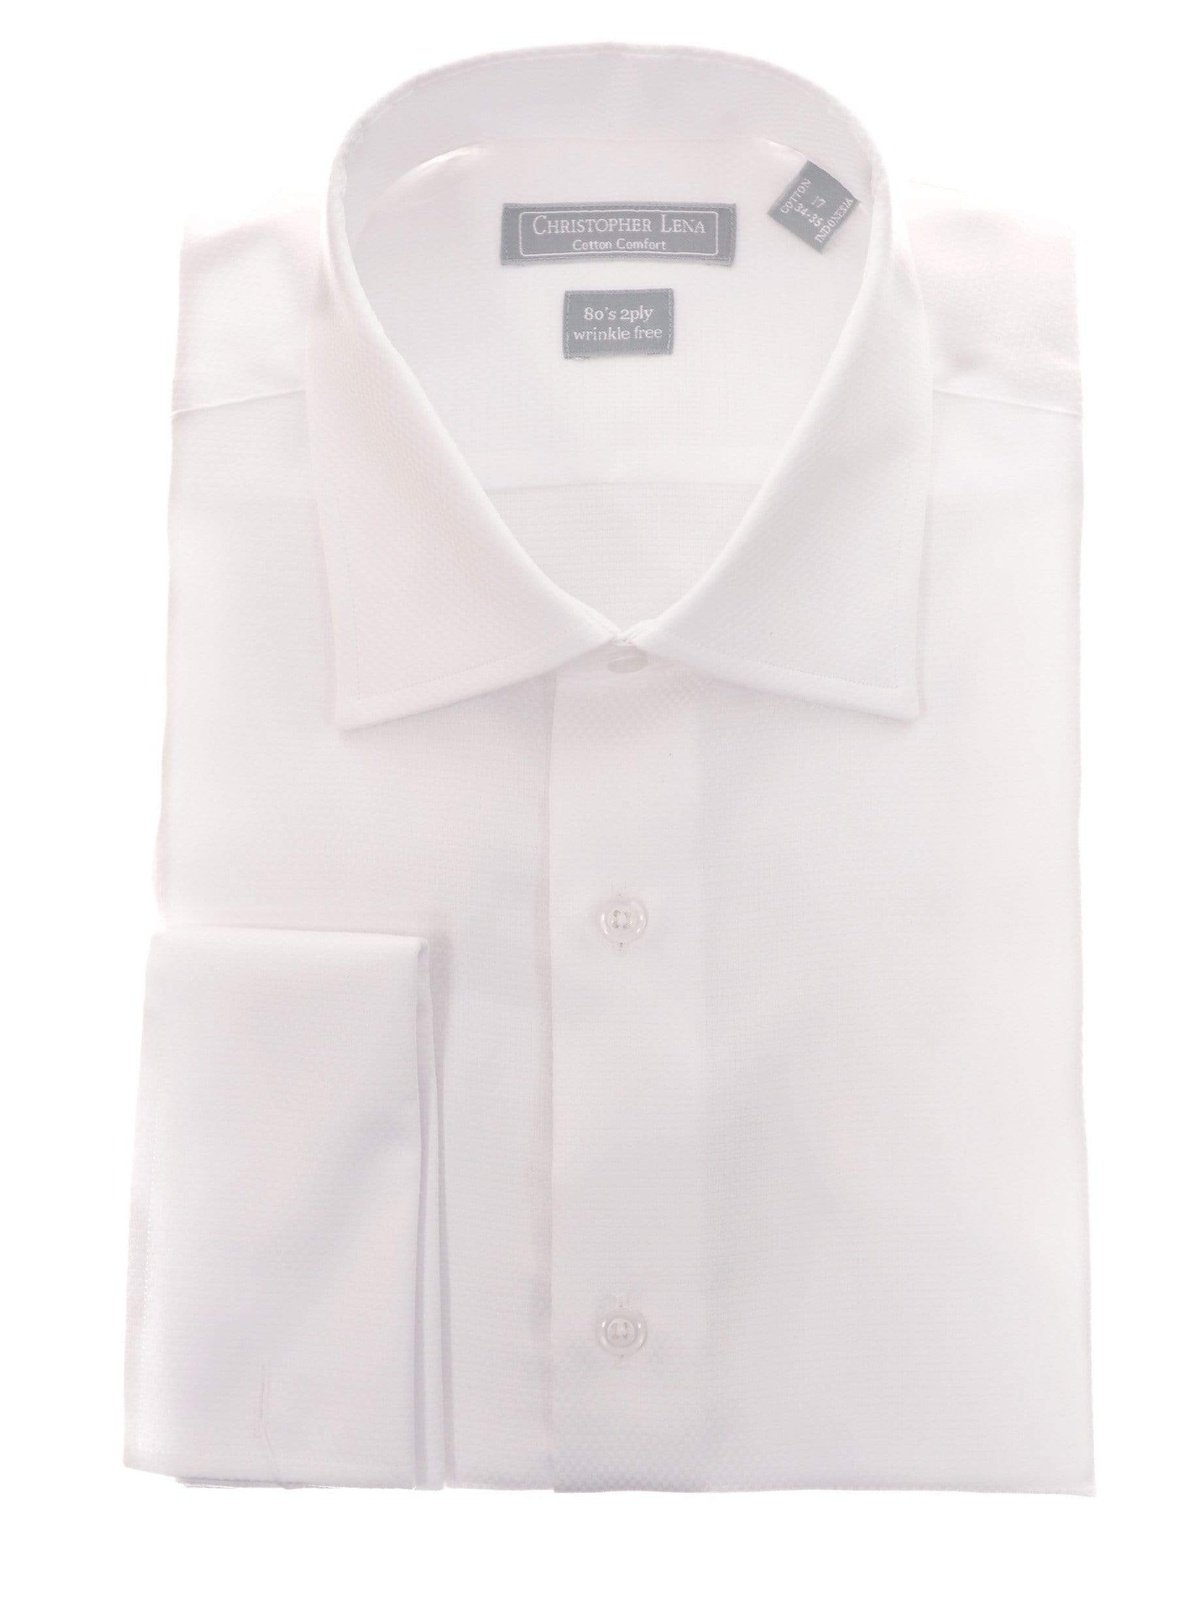 Christopher Lena Bestselling Items Mens Classic Fit White Textured French Cuff Wrinkle Free Cotton Dress Shirt